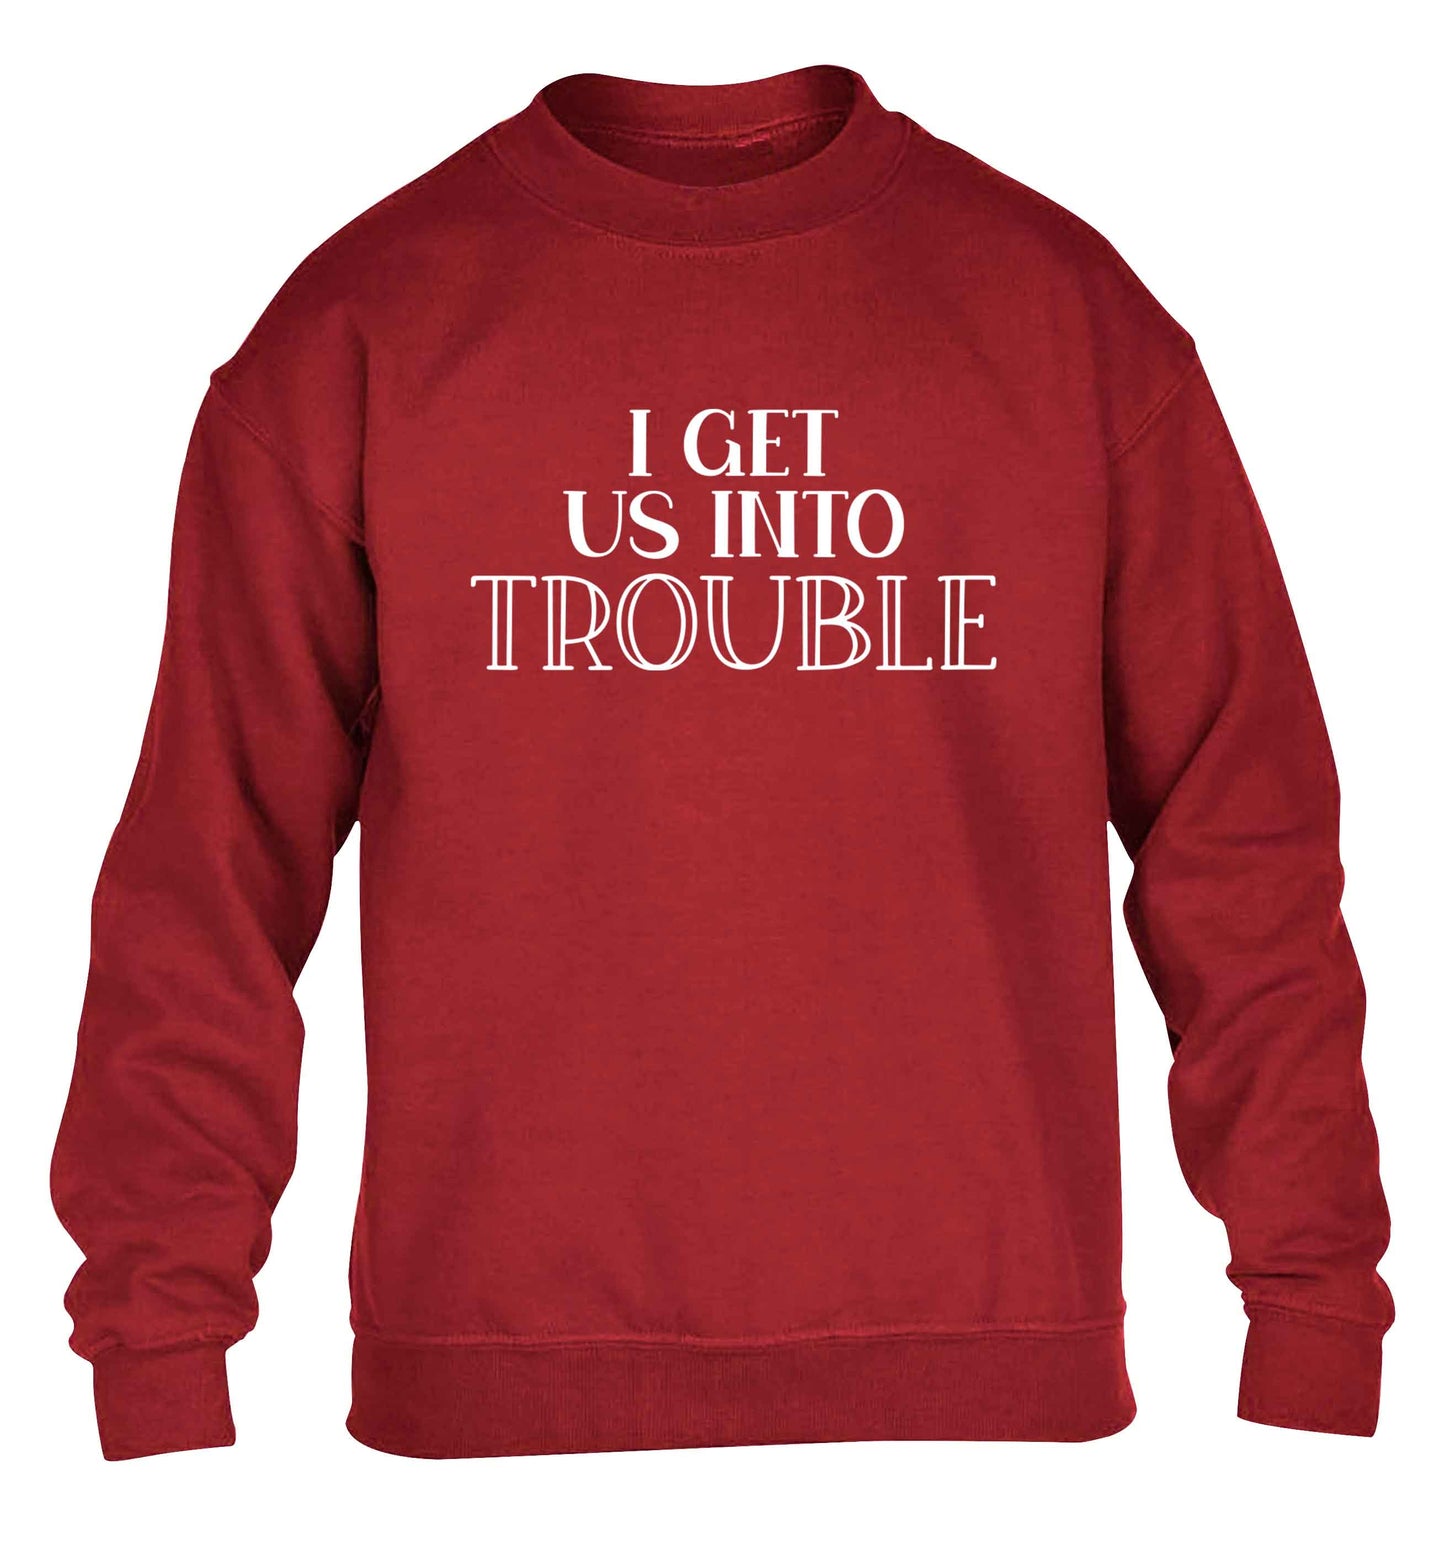 I get us into trouble children's grey sweater 12-13 Years